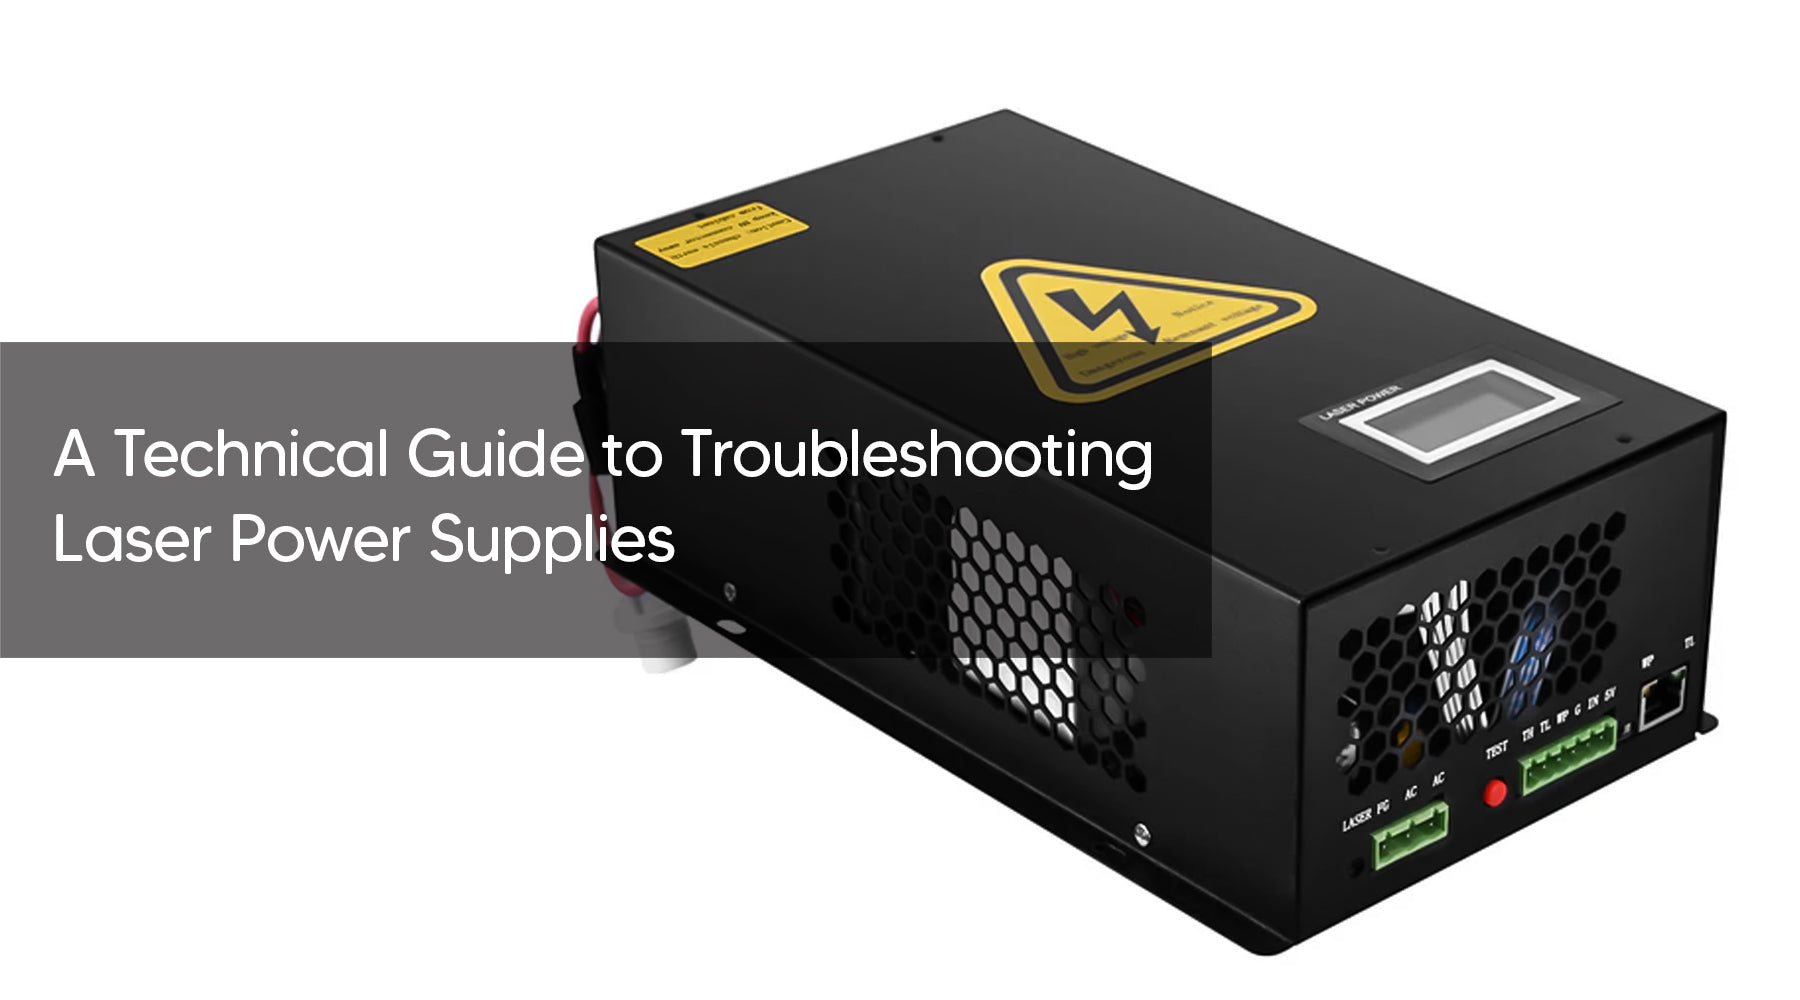 A Technical Guide to Troubleshooting Laser Power Supplies